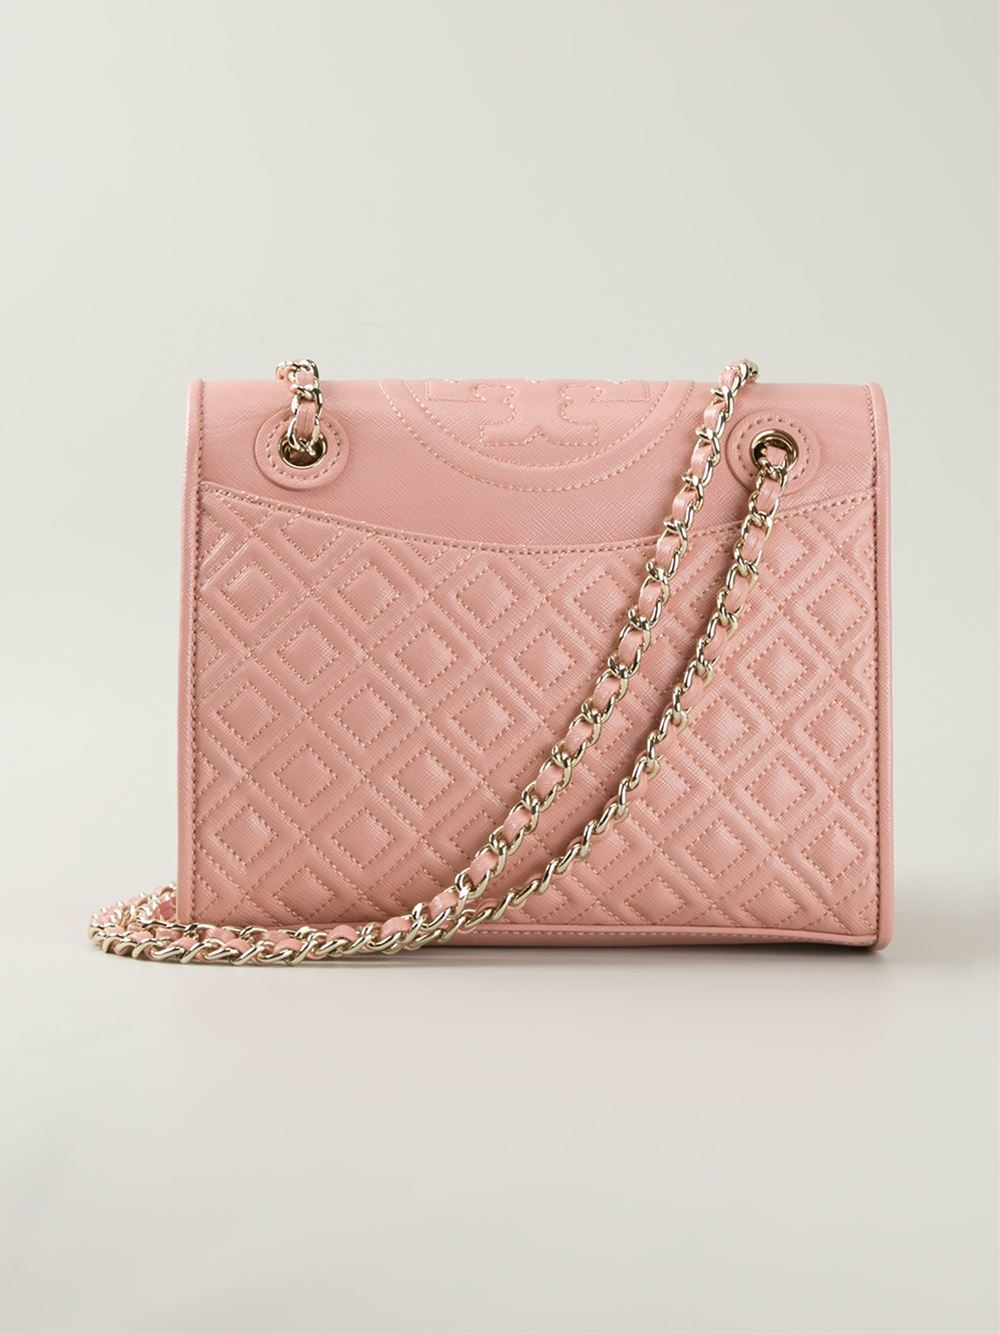 Tory burch Quilted Cross Body Bag in Pink | Lyst